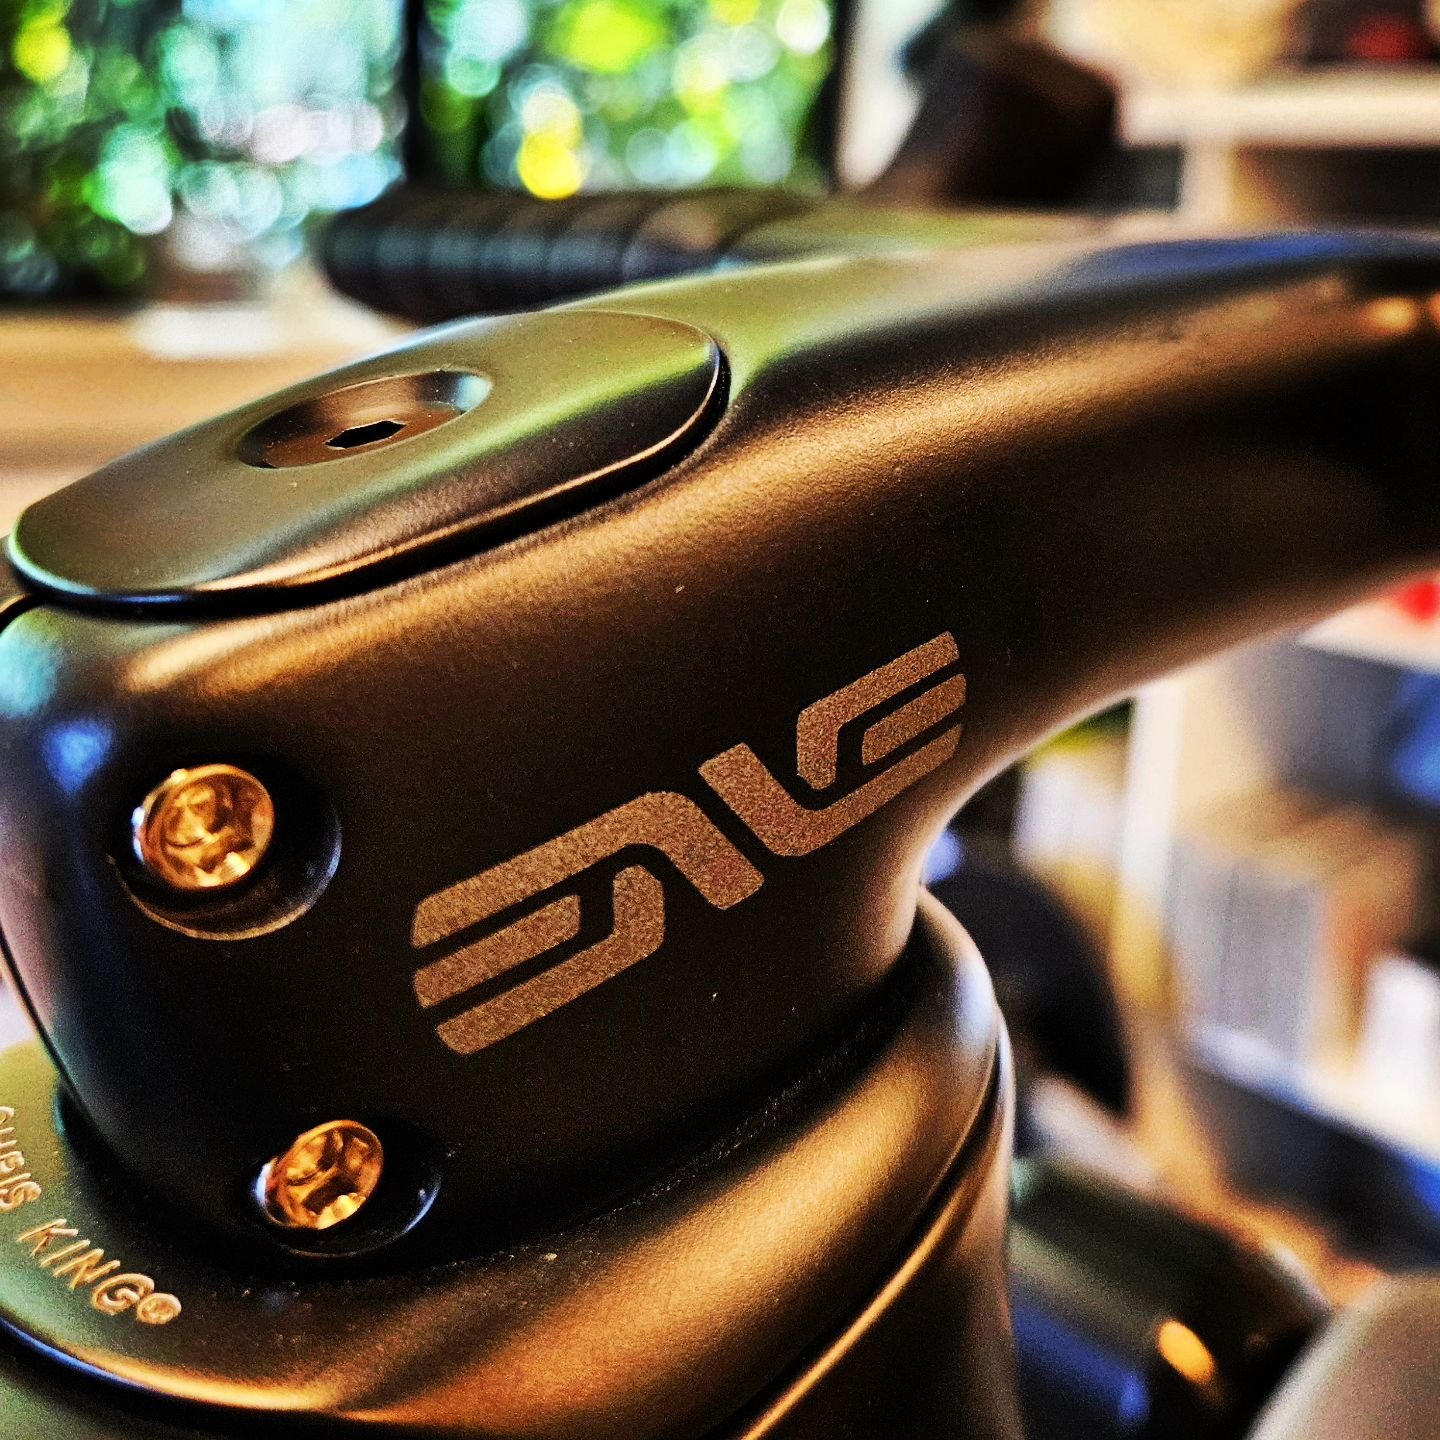 Beautiful @envecomposites Custom Road in the studio today. Helping people get their dream bike that fits them perfectly is one of the perks of the job. What a sweet machine!

#moregirlsonbikes

morekidsonbikes&nbsp;

#stoked

#bikefitting&nbsp;

#gro